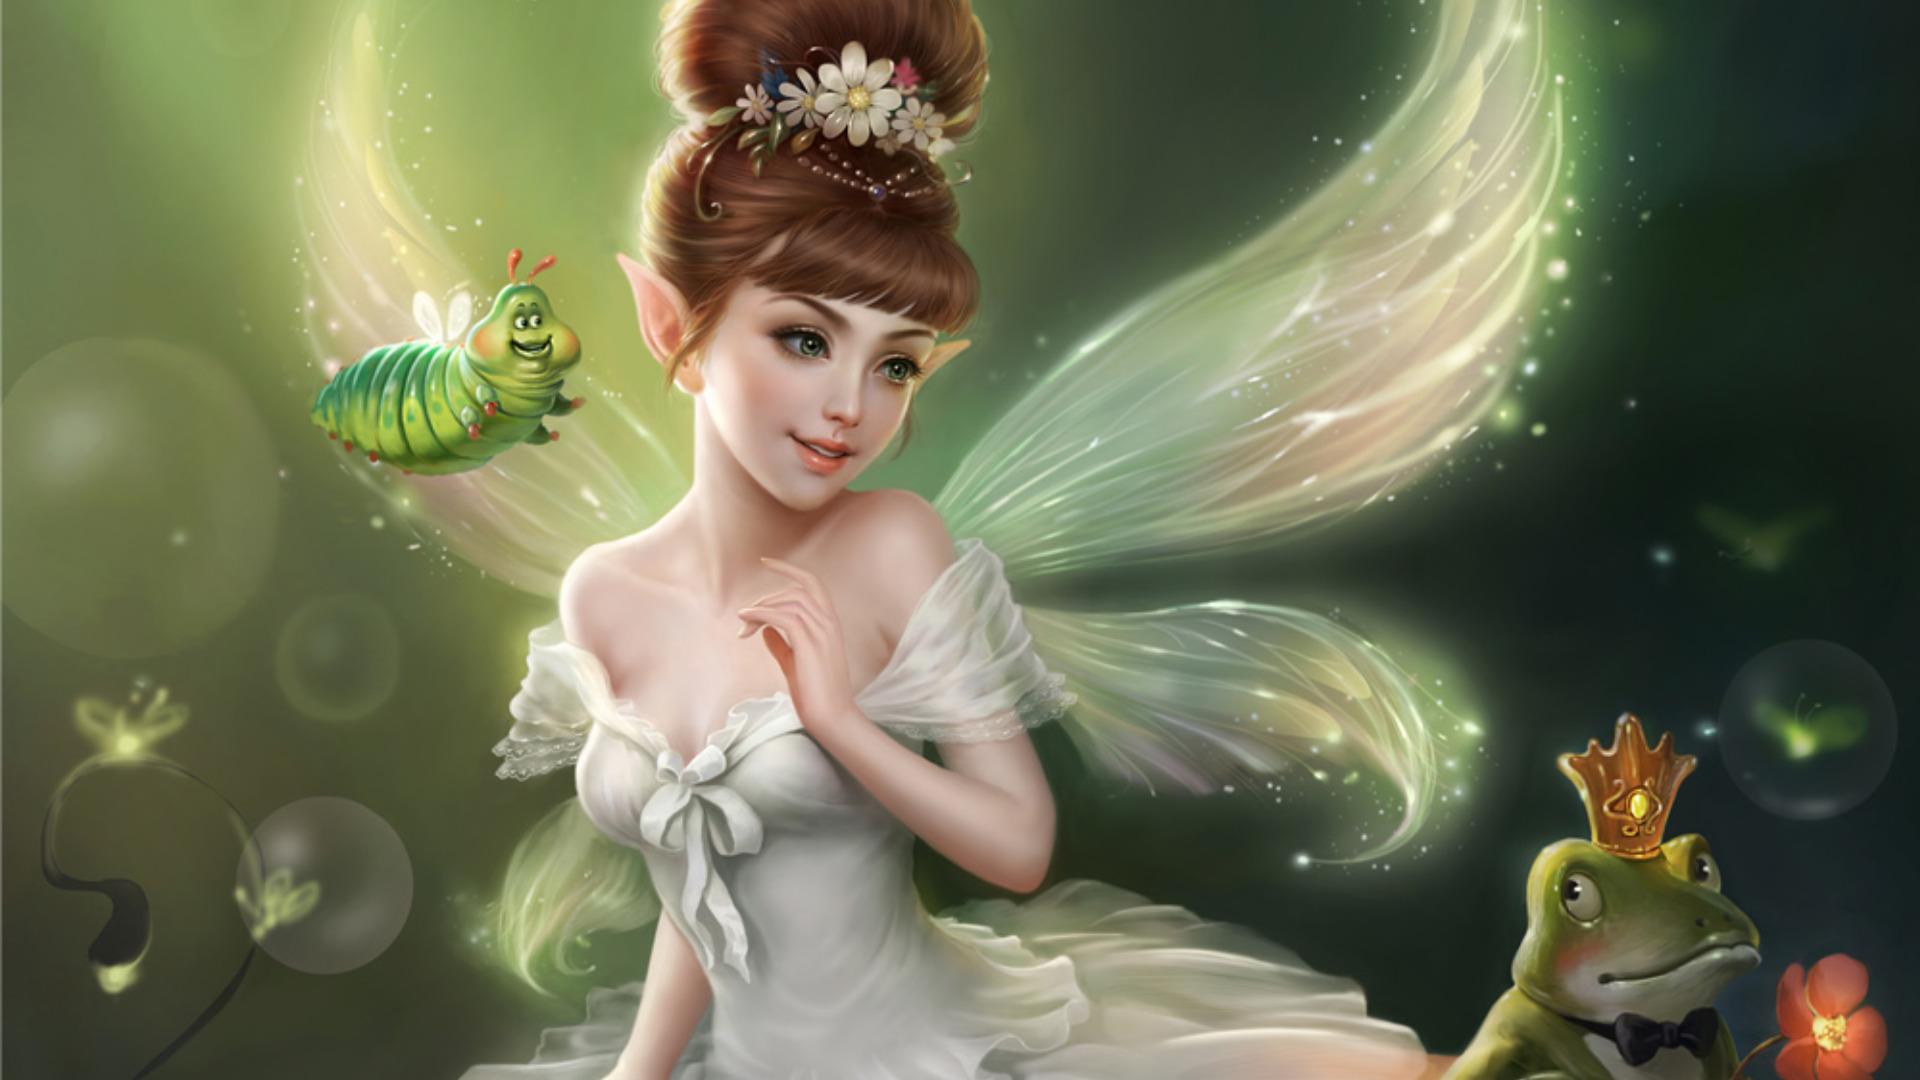 Ethereal Fairy Wallpapers Wallpaper Cave Images, Photos, Reviews